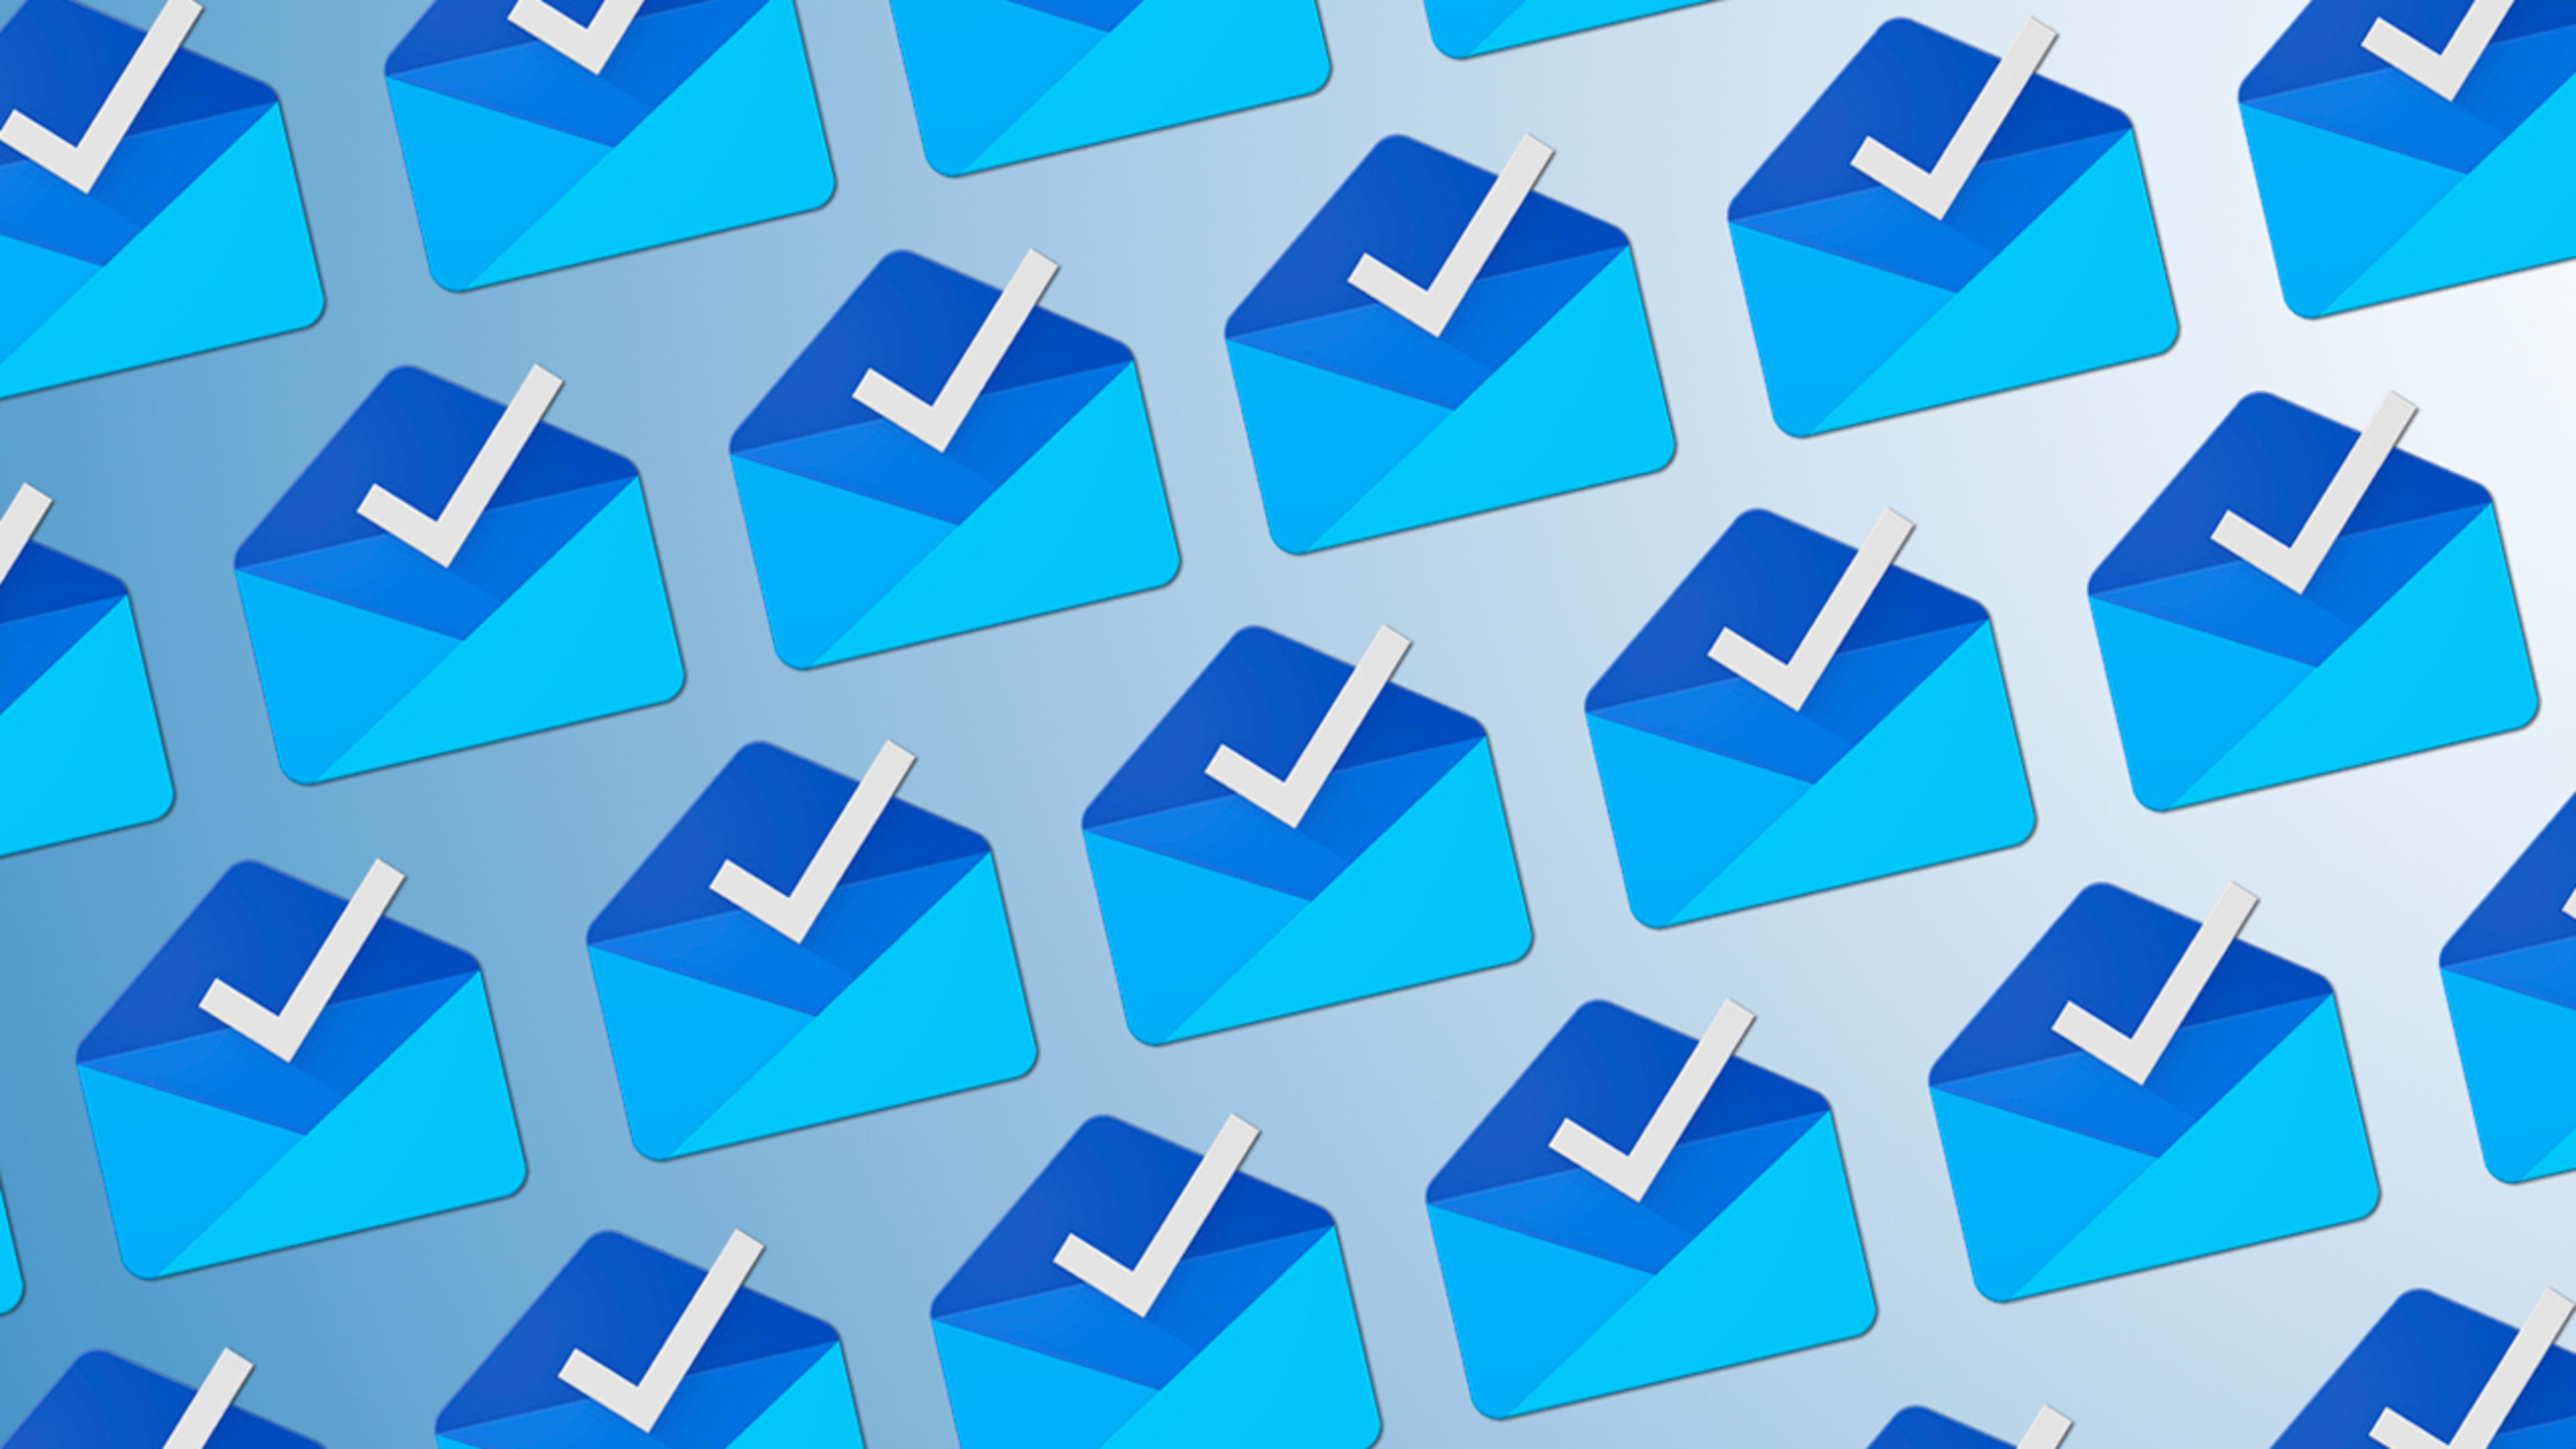 Inbox, Google’s playground for email innovation, is going bye-bye